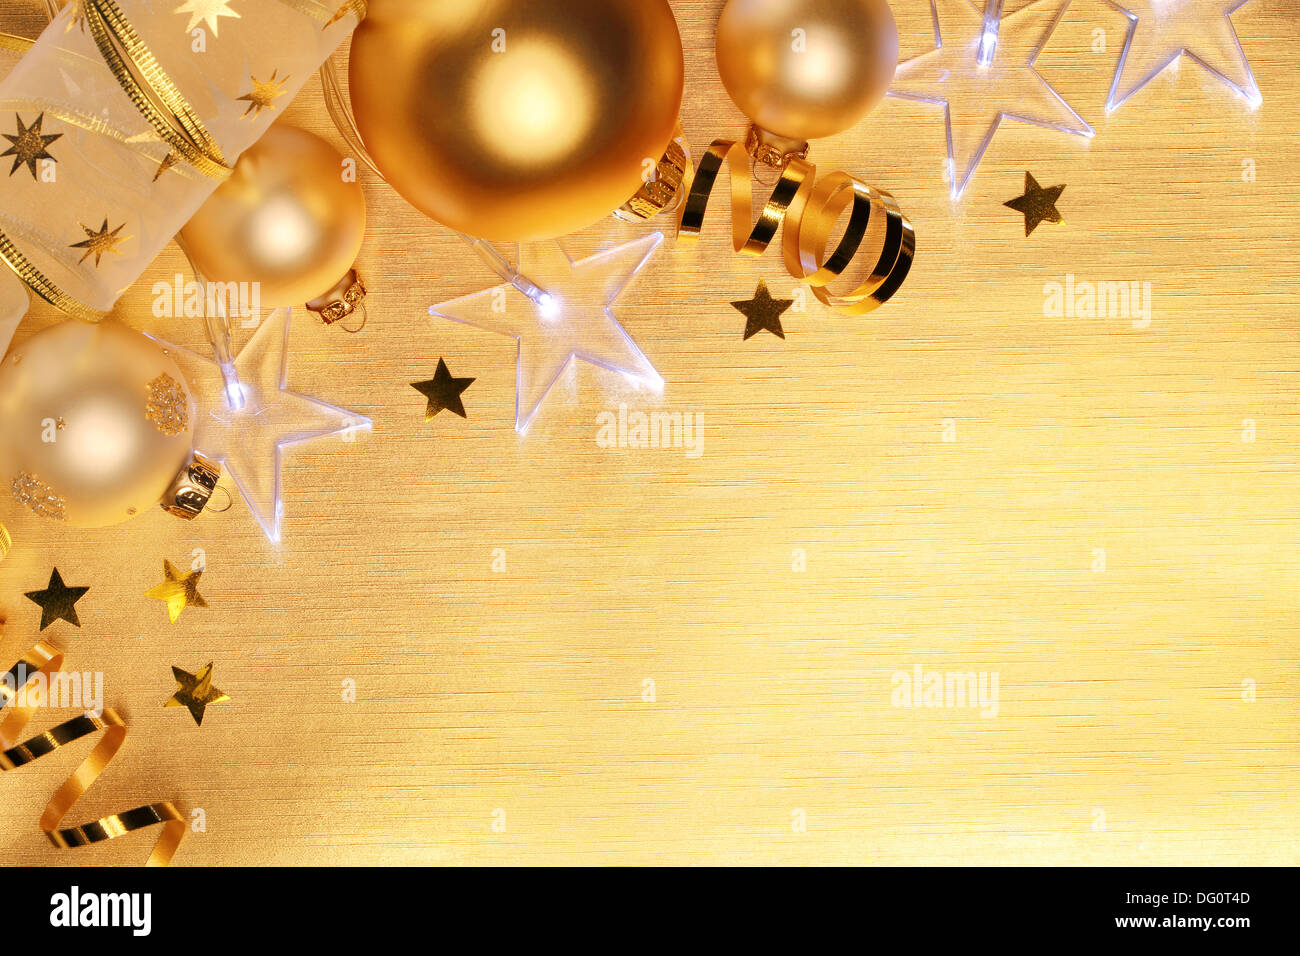 Christmas balls and star lights on golden background Stock Photo